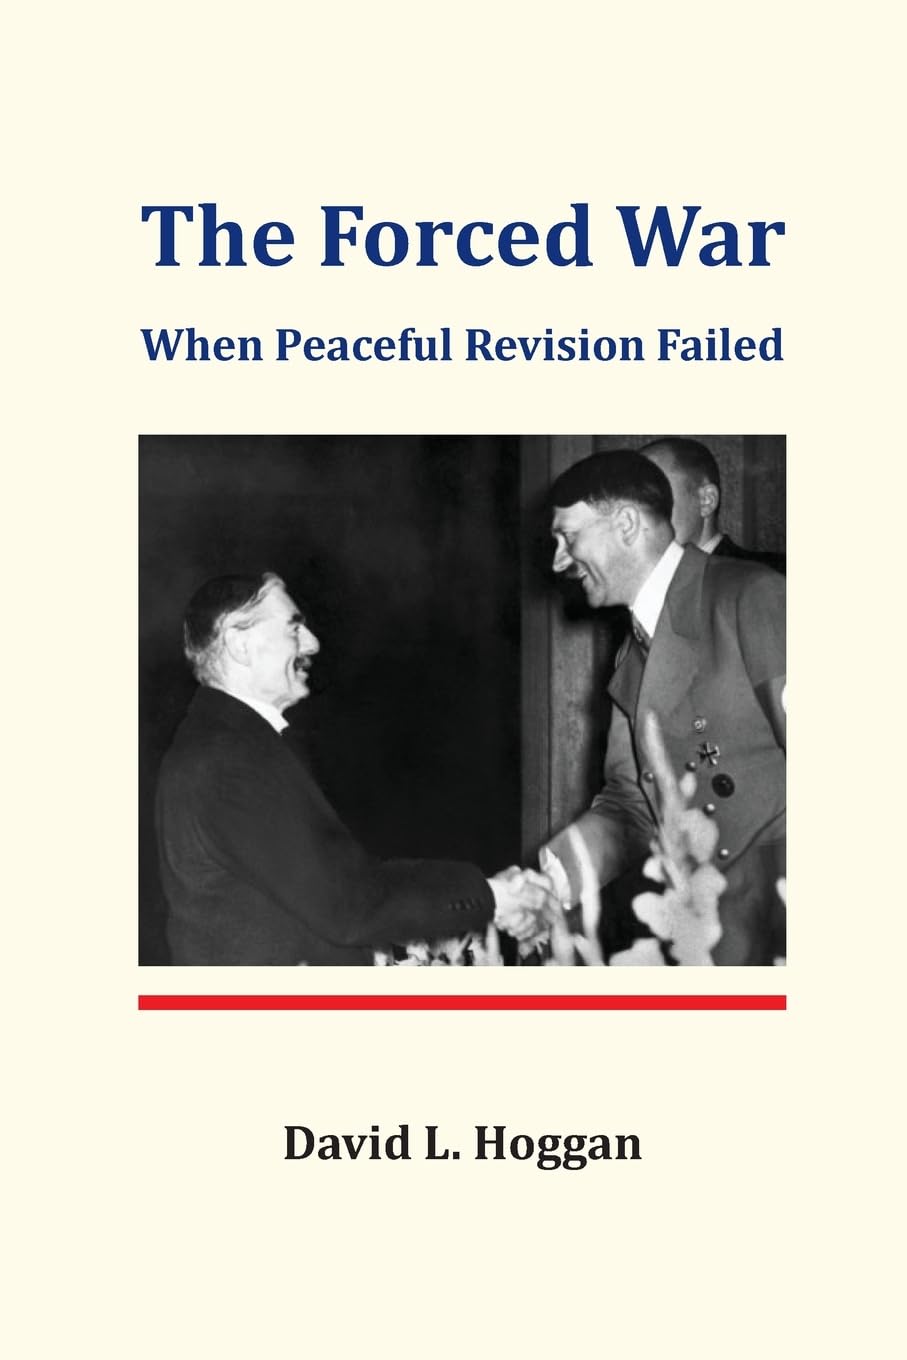 The Forced War: When Peaceful Revision Failed (Softcover)